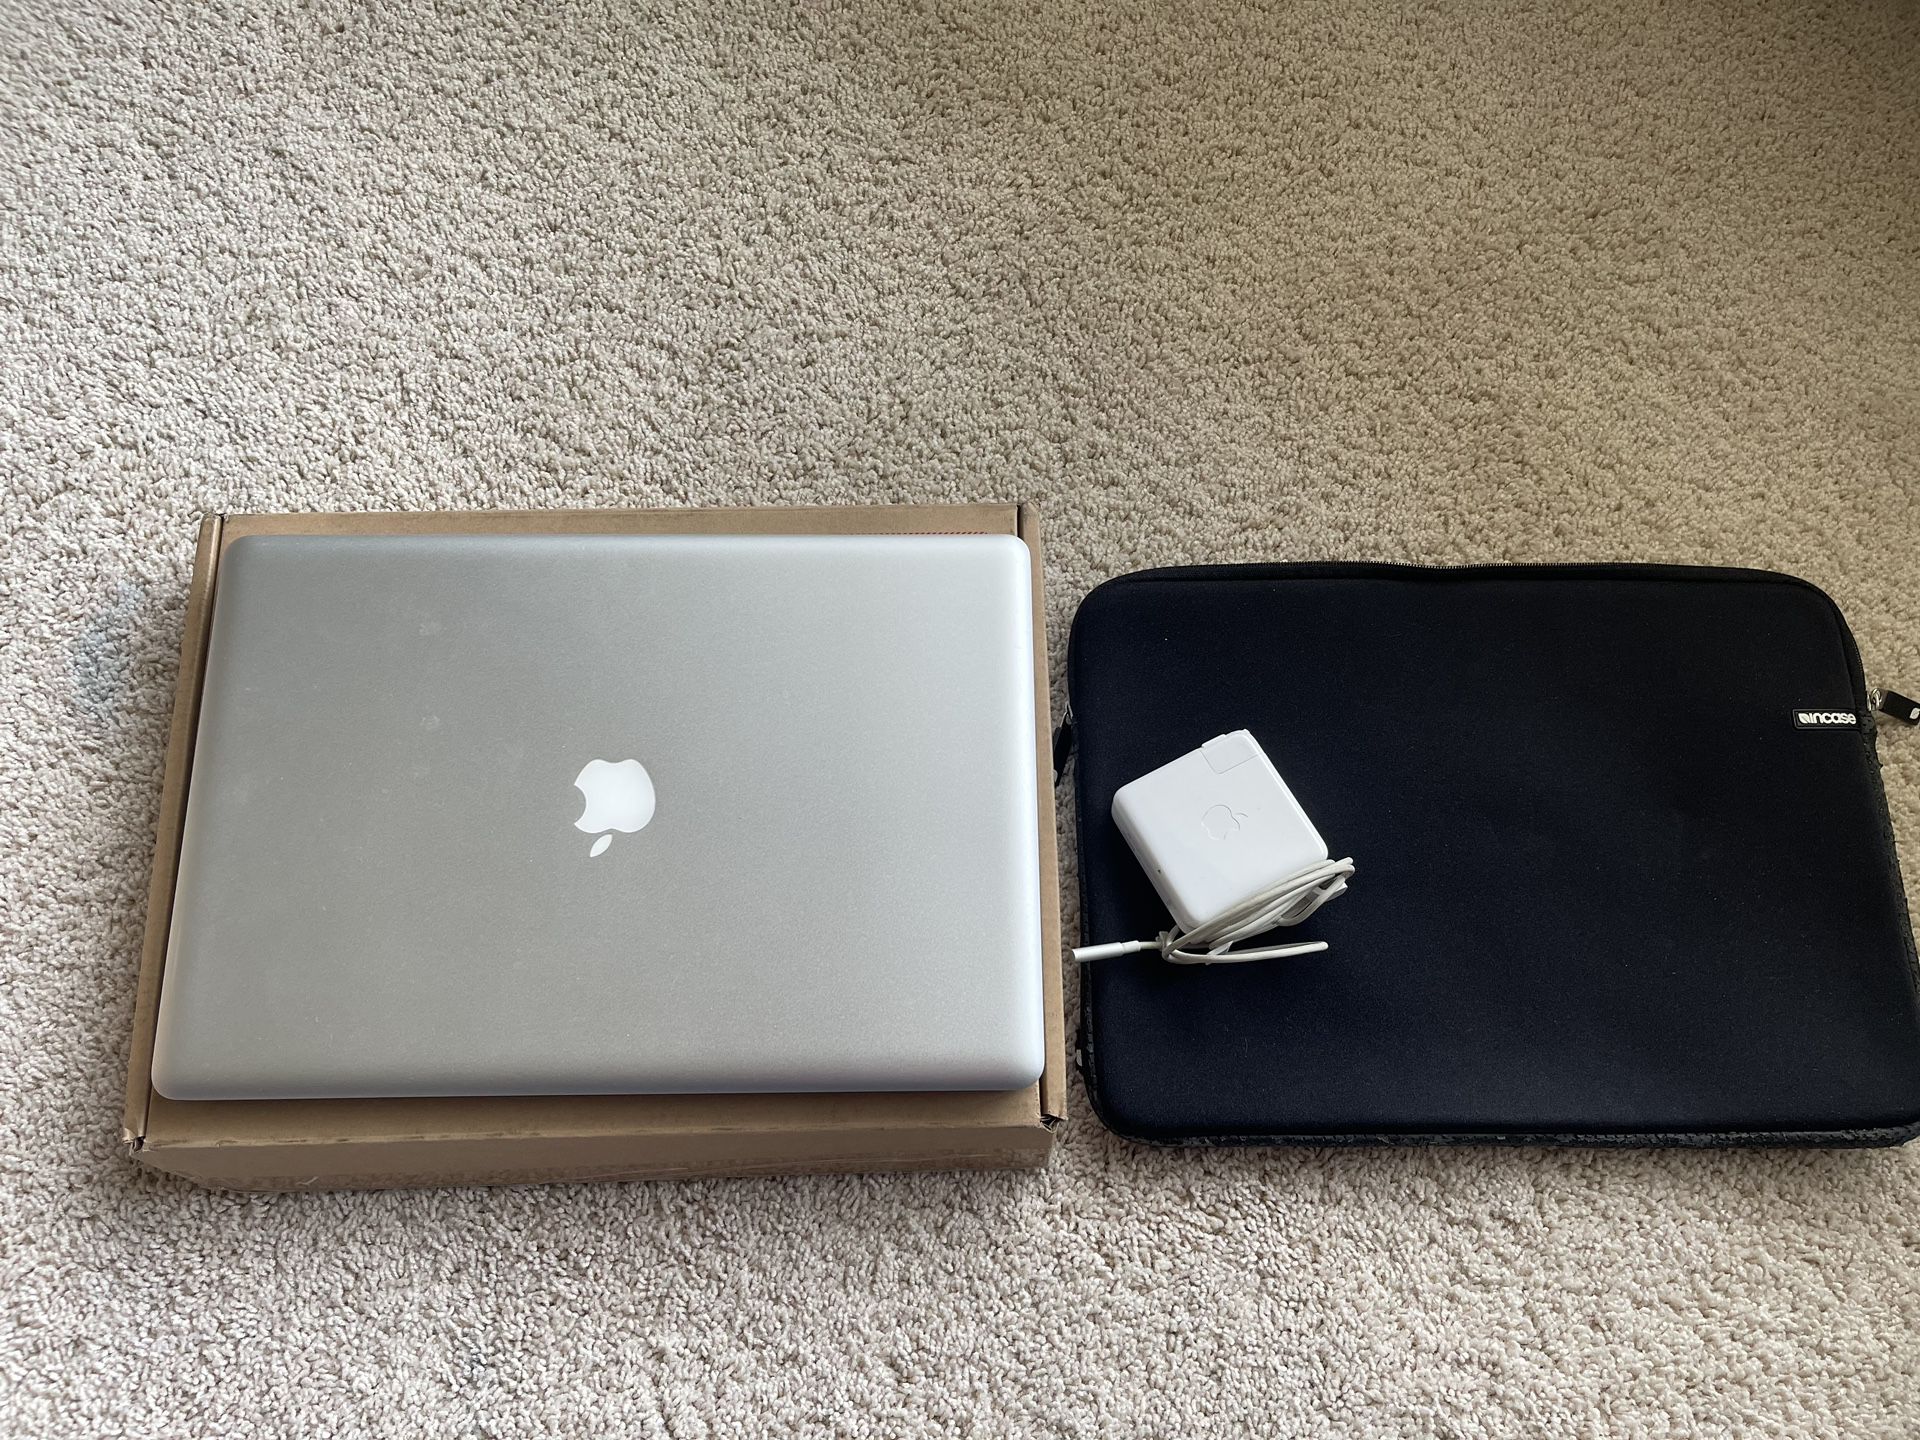 MacBook Pro 17”, 2.8ghz, 8GB Ram, SSD, for Sale in Issaquah, WA - OfferUp